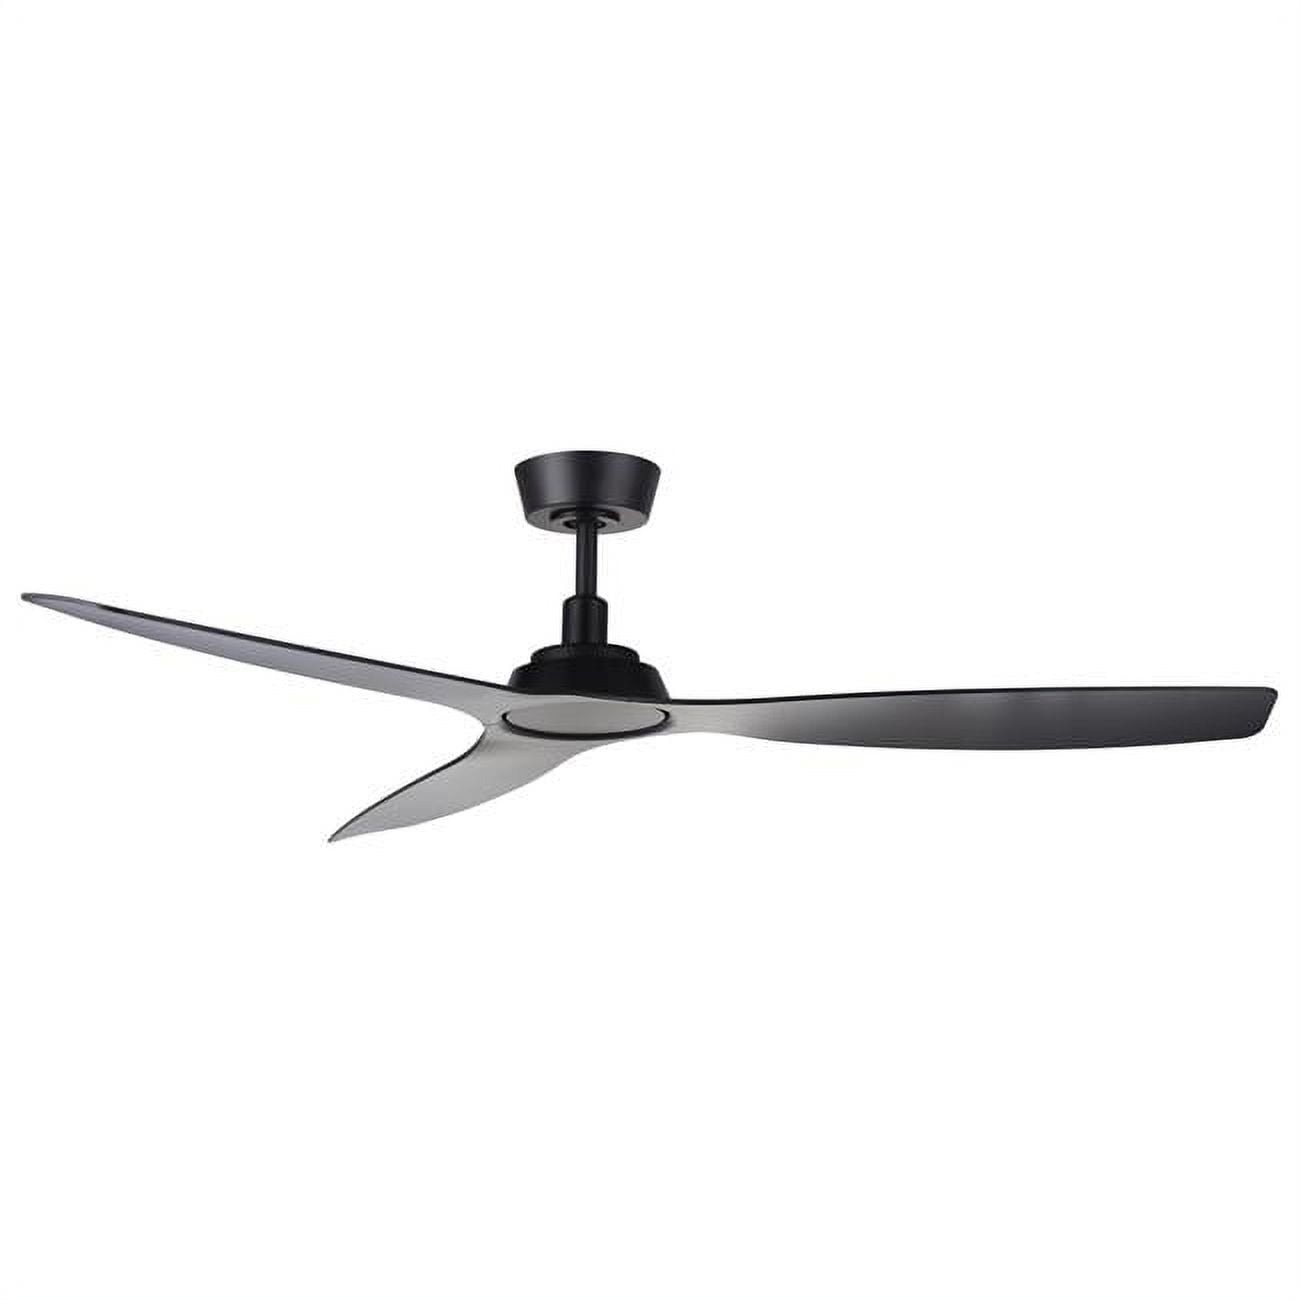 Picture of Lucci Air 21065101 Lucci Air Moto Black and Matte Black 52-inch Ceiling Fan